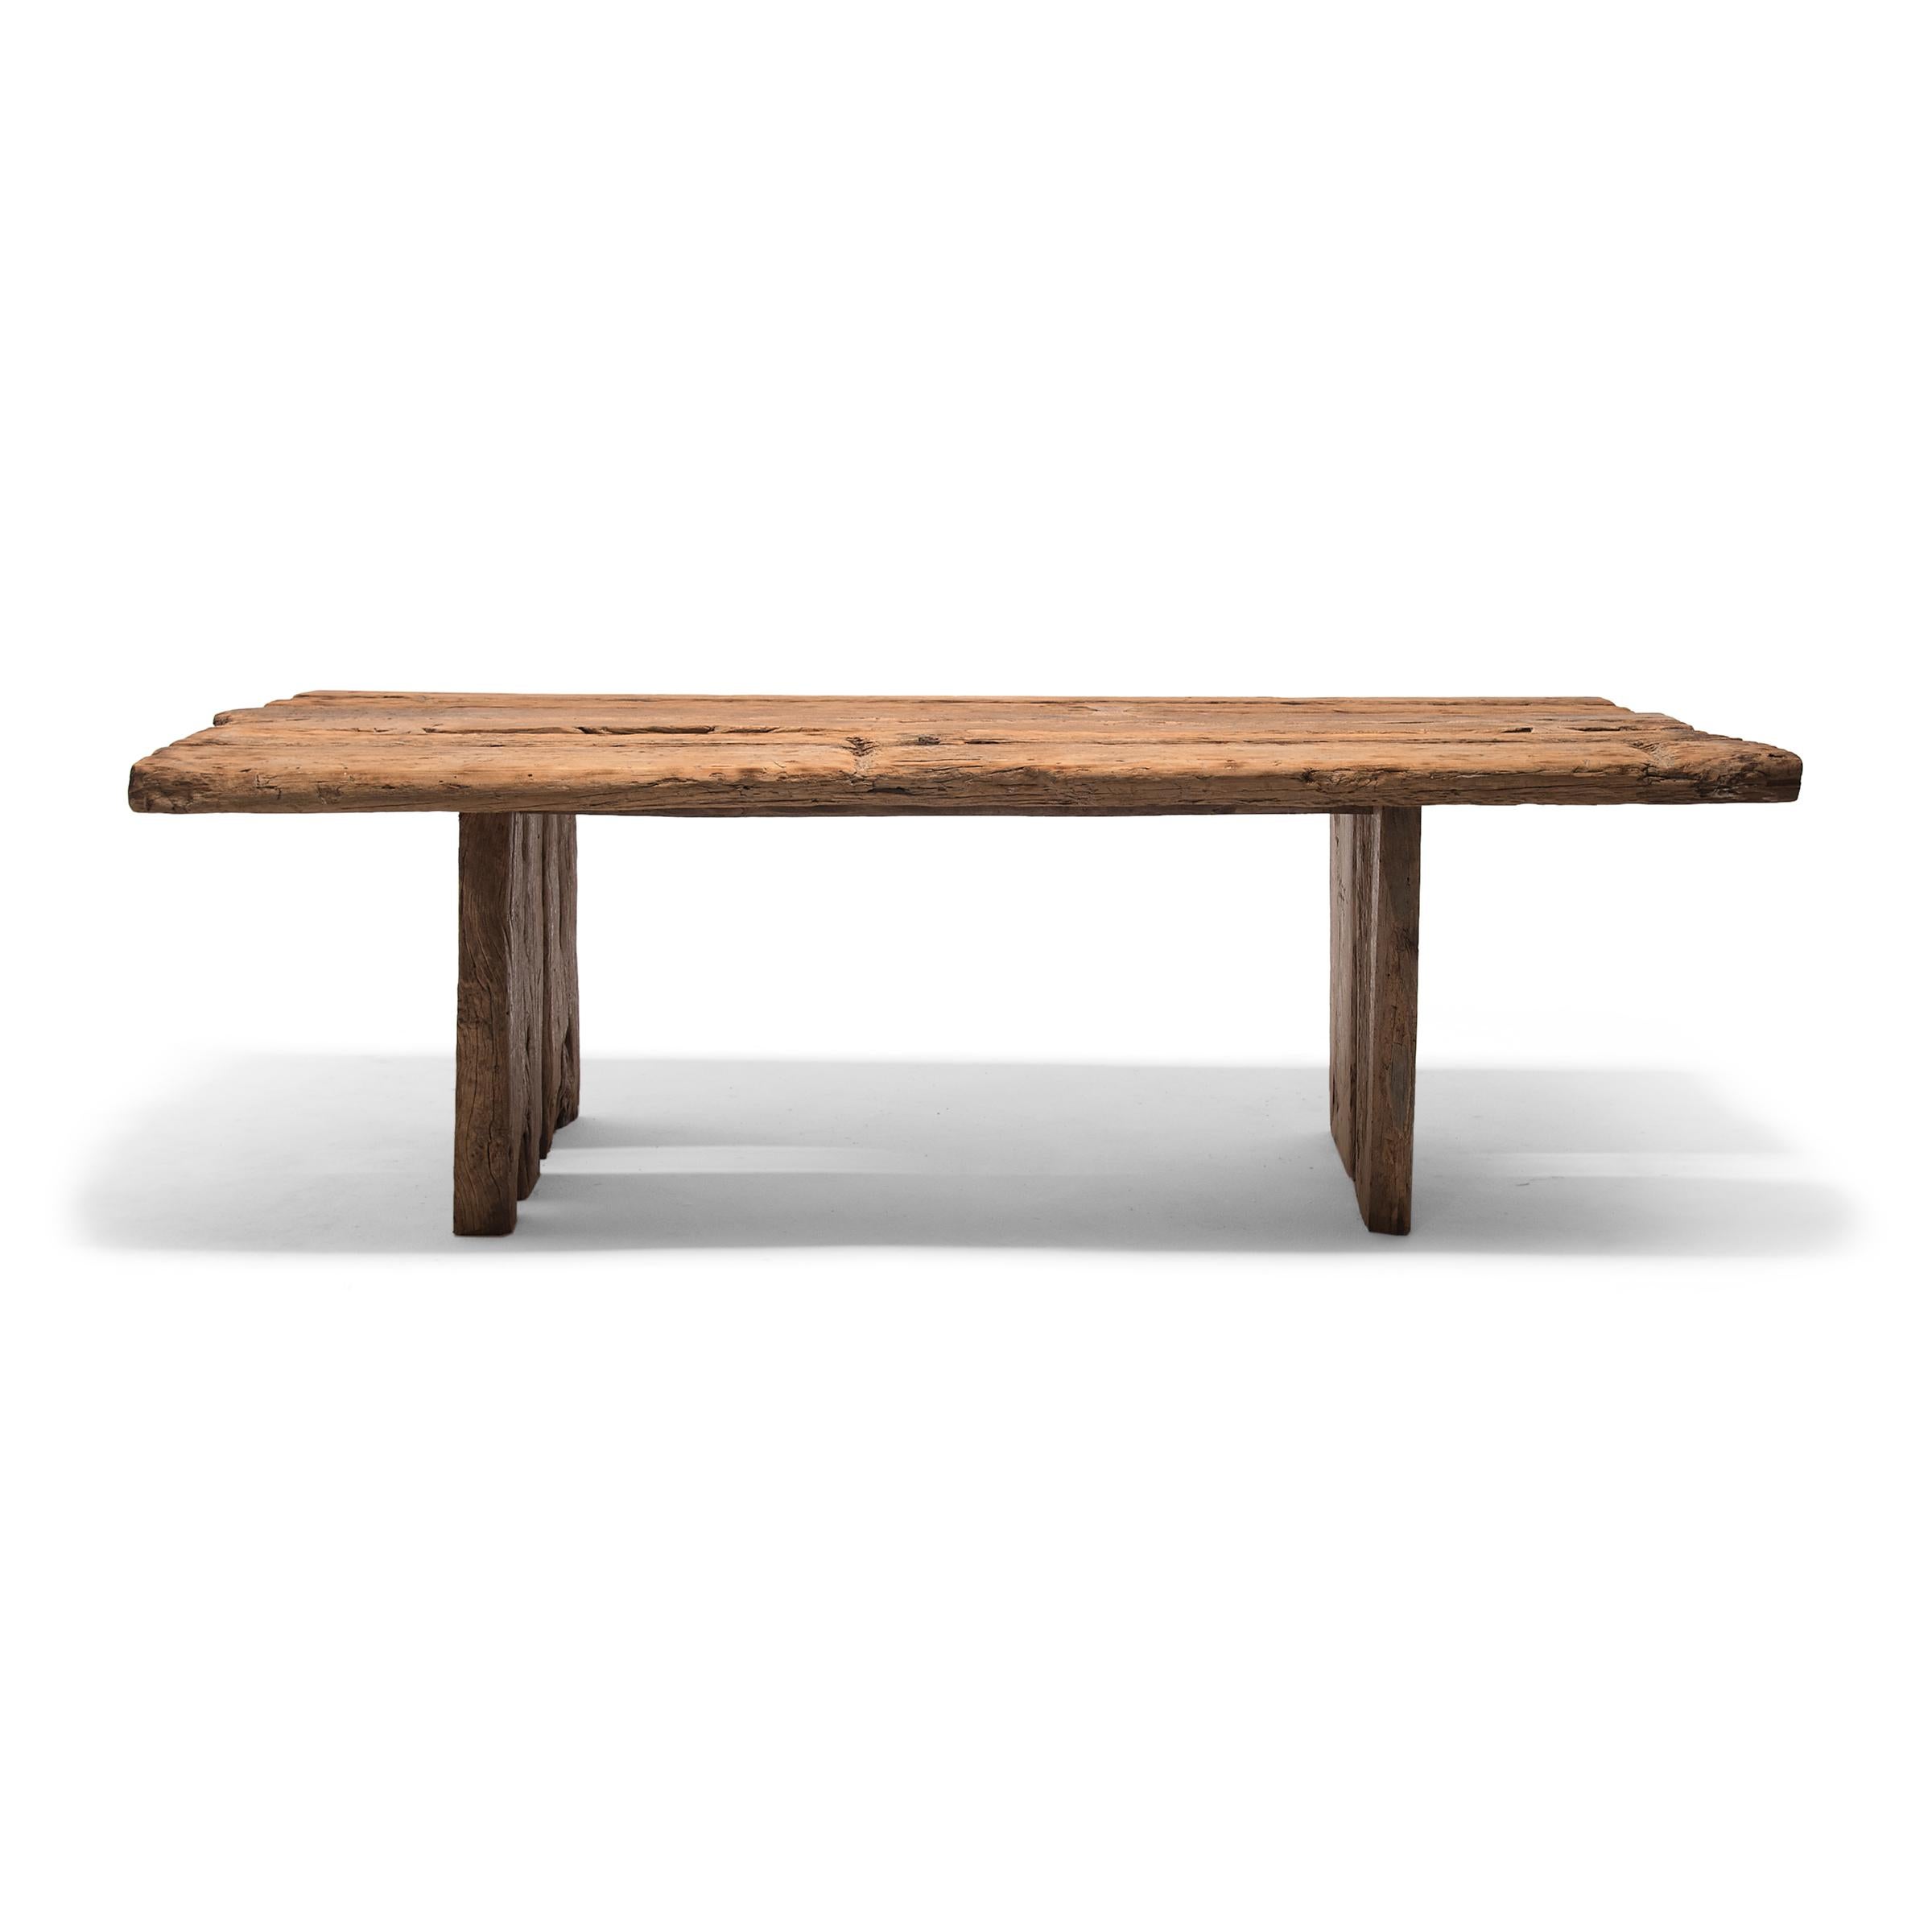 Made of wood reclaimed from Qing-dynasty architecture, this contemporary dining table is a celebration of wabi-sabi style. The clean lines highlight every knot, split, groove, and color variation in our expressive 18th century elmwood